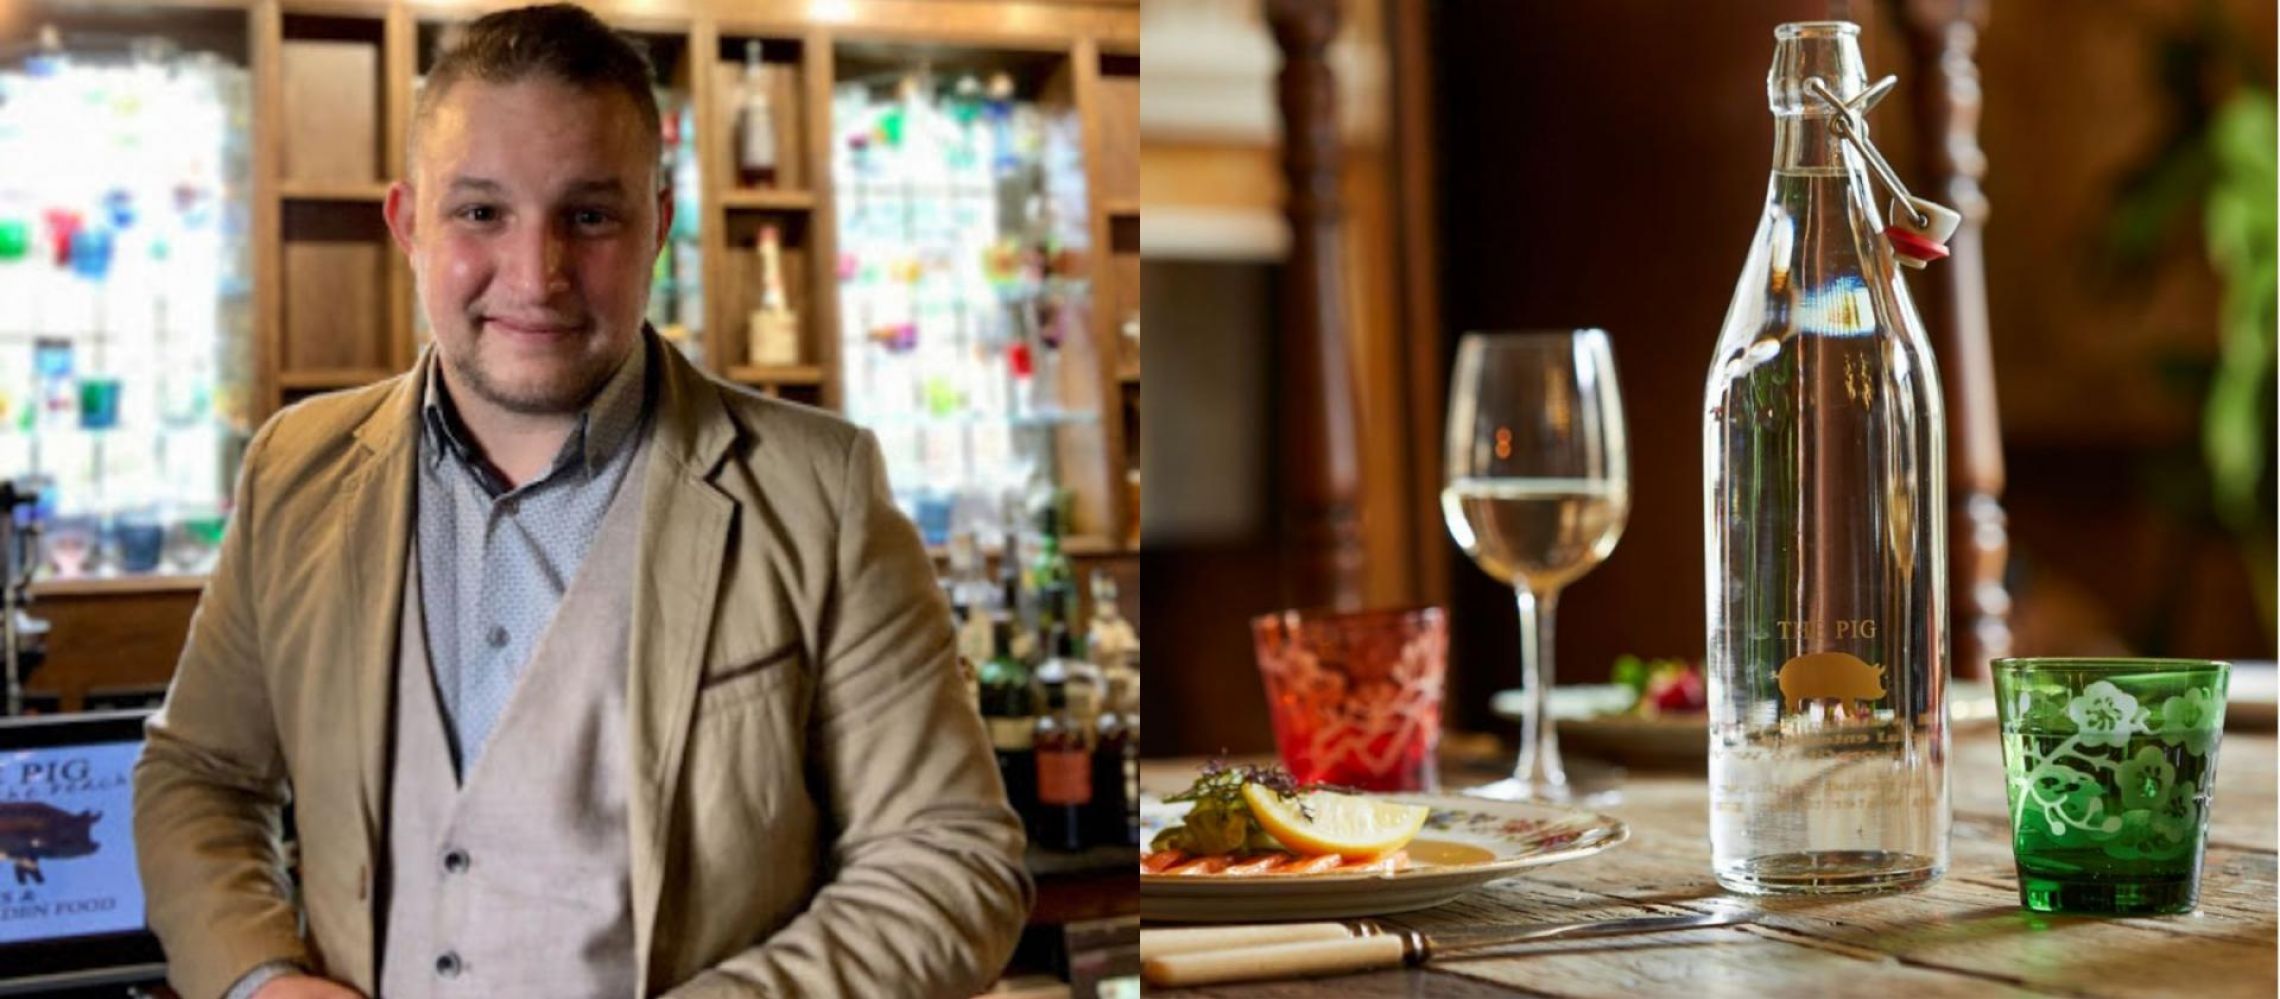 Photo for: Know Your Bartenders: Gabor David Molnar, Bar Manager at The PIG Hotel